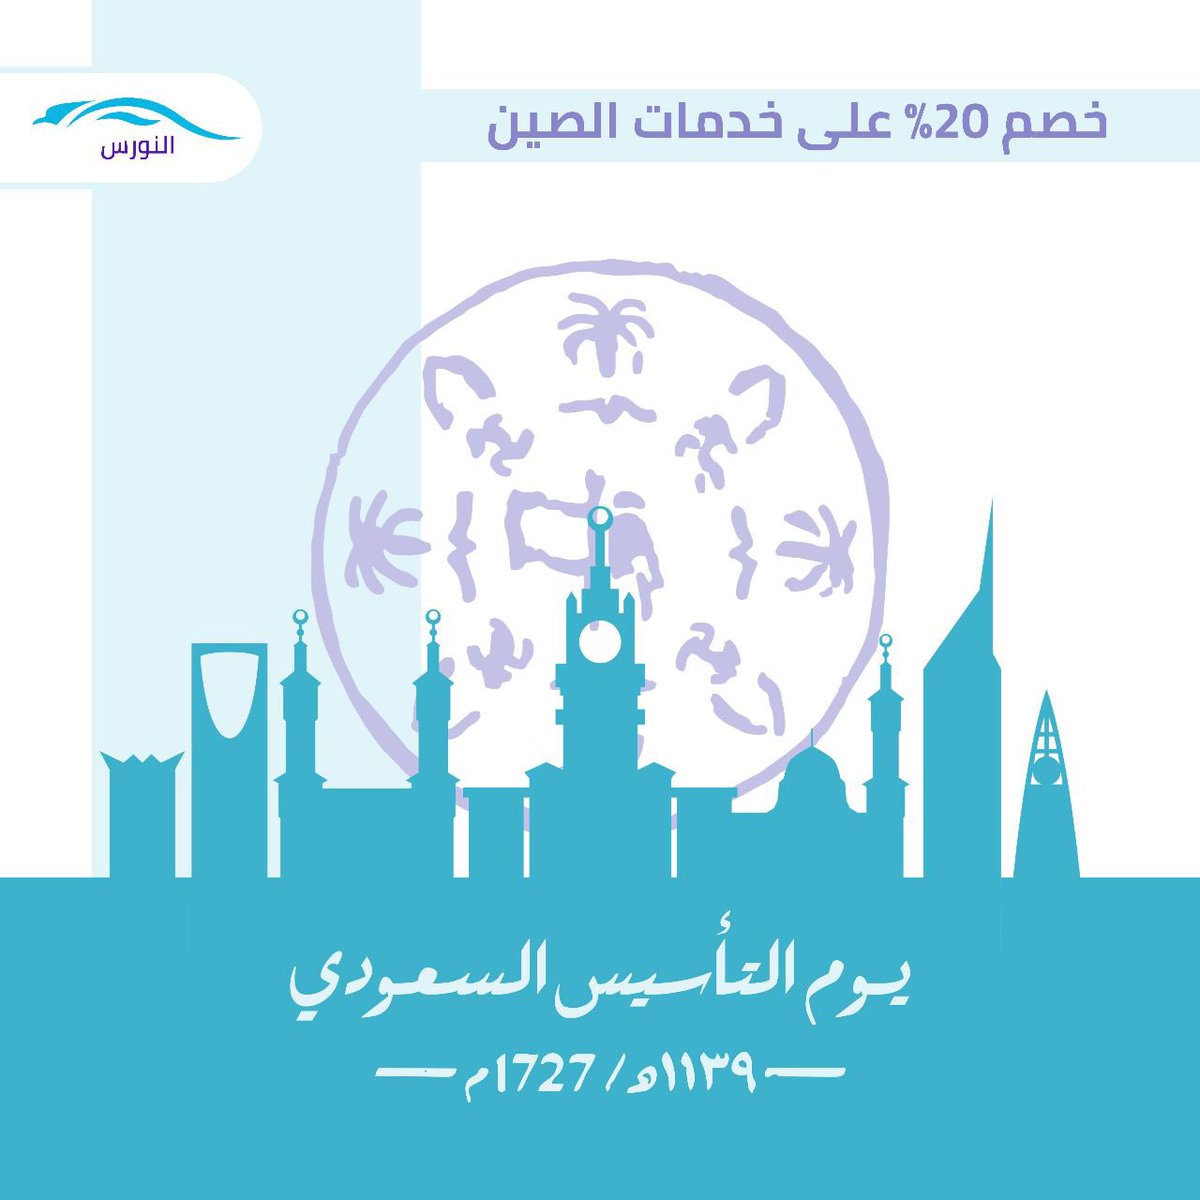 Saudi Founding Day 2022 | يوم التأسيس السعودي 

20% off on our China services! 

#saudi #saudifoundationday #saudifoundingday #founding #foundation #day #2023 #offer #offers #20percentoff